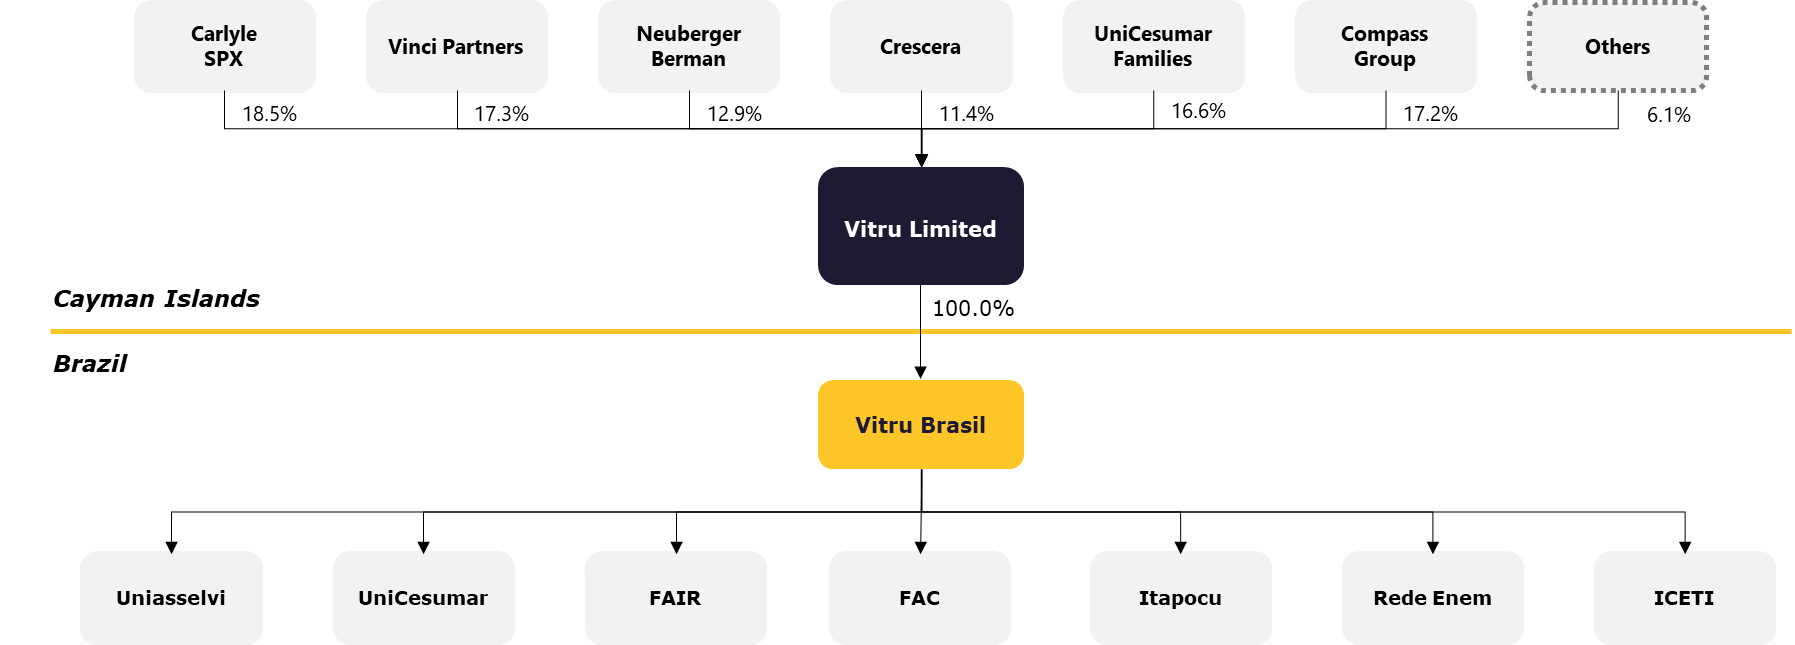 Vitru Group simplified structure prior to the Proposed Transaction